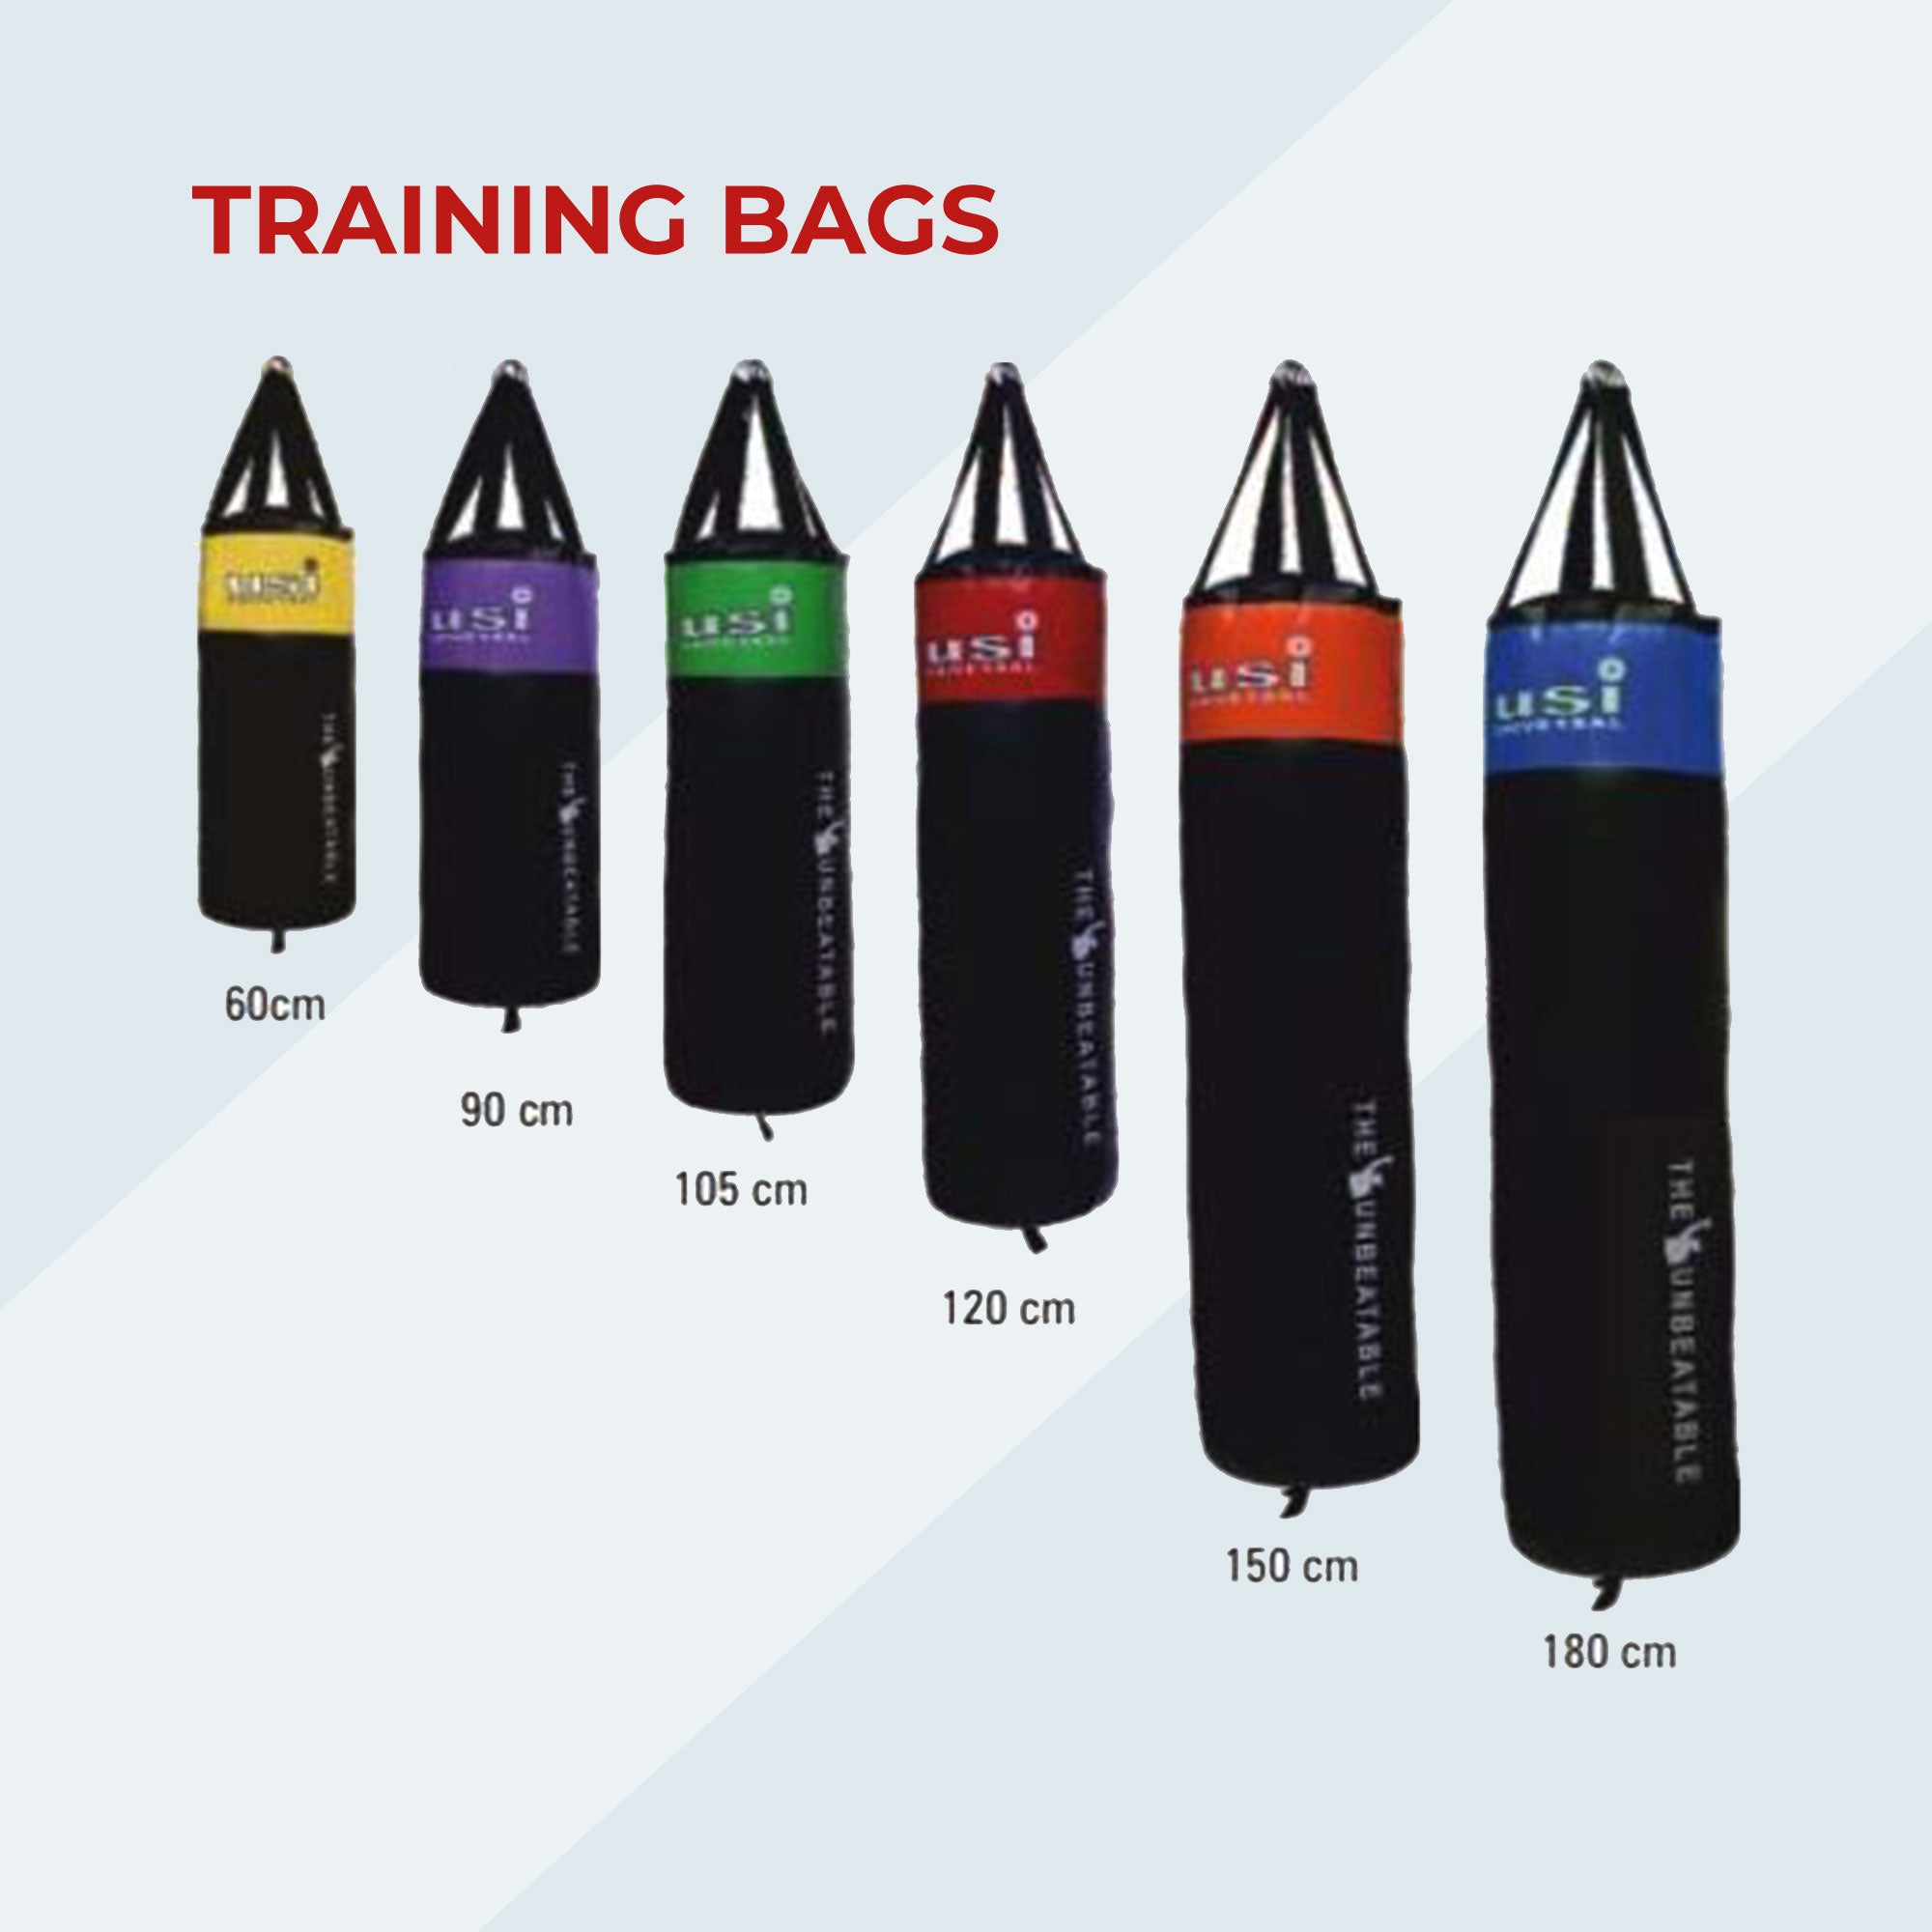 Buy QPAU Larger Stable Punching Bag for Kids, Tall 66 Inch Inflatable  Boxing Bag, Gifts for Boys & Girls Age 5-12 for Practicing Karate,  Taekwondo, MMA and to Relieve Pent Up Energy